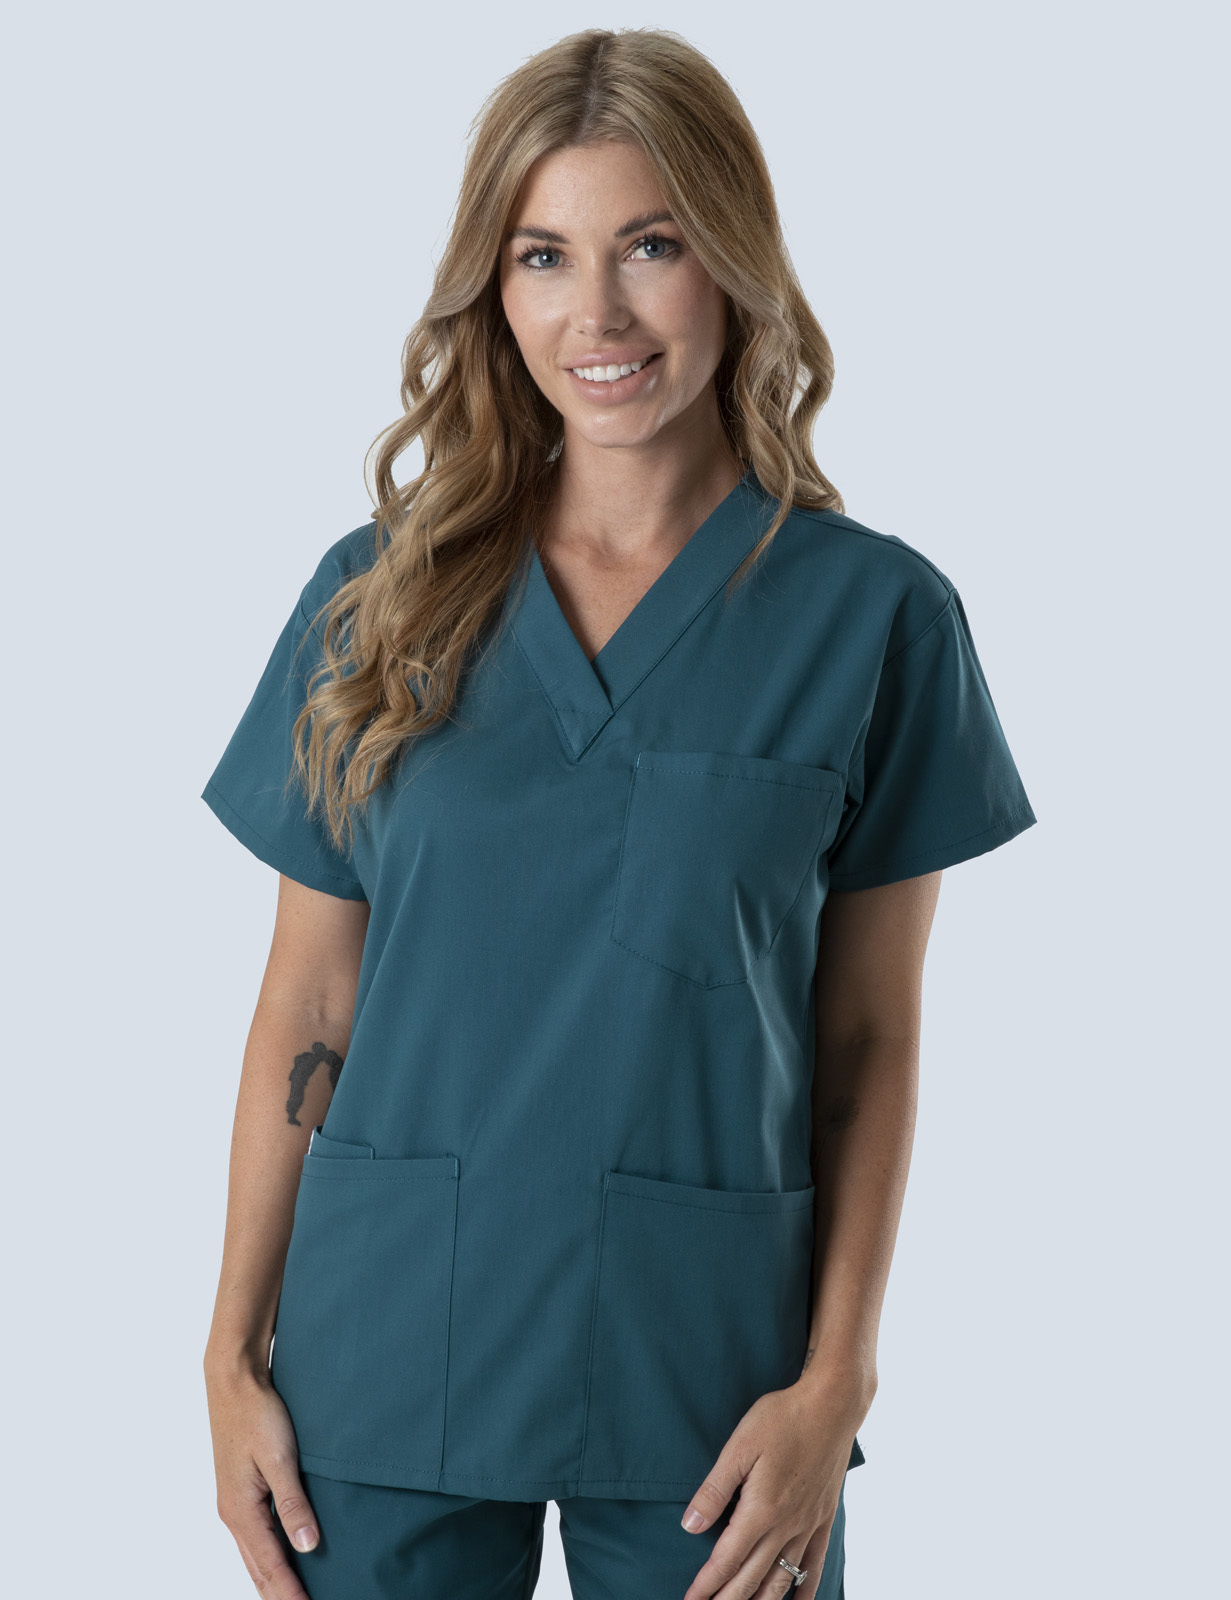 Canberra Hospital - Physiotherapy Admin (4 Pocket top and Cargo Pants in Caribbean incl Logos)